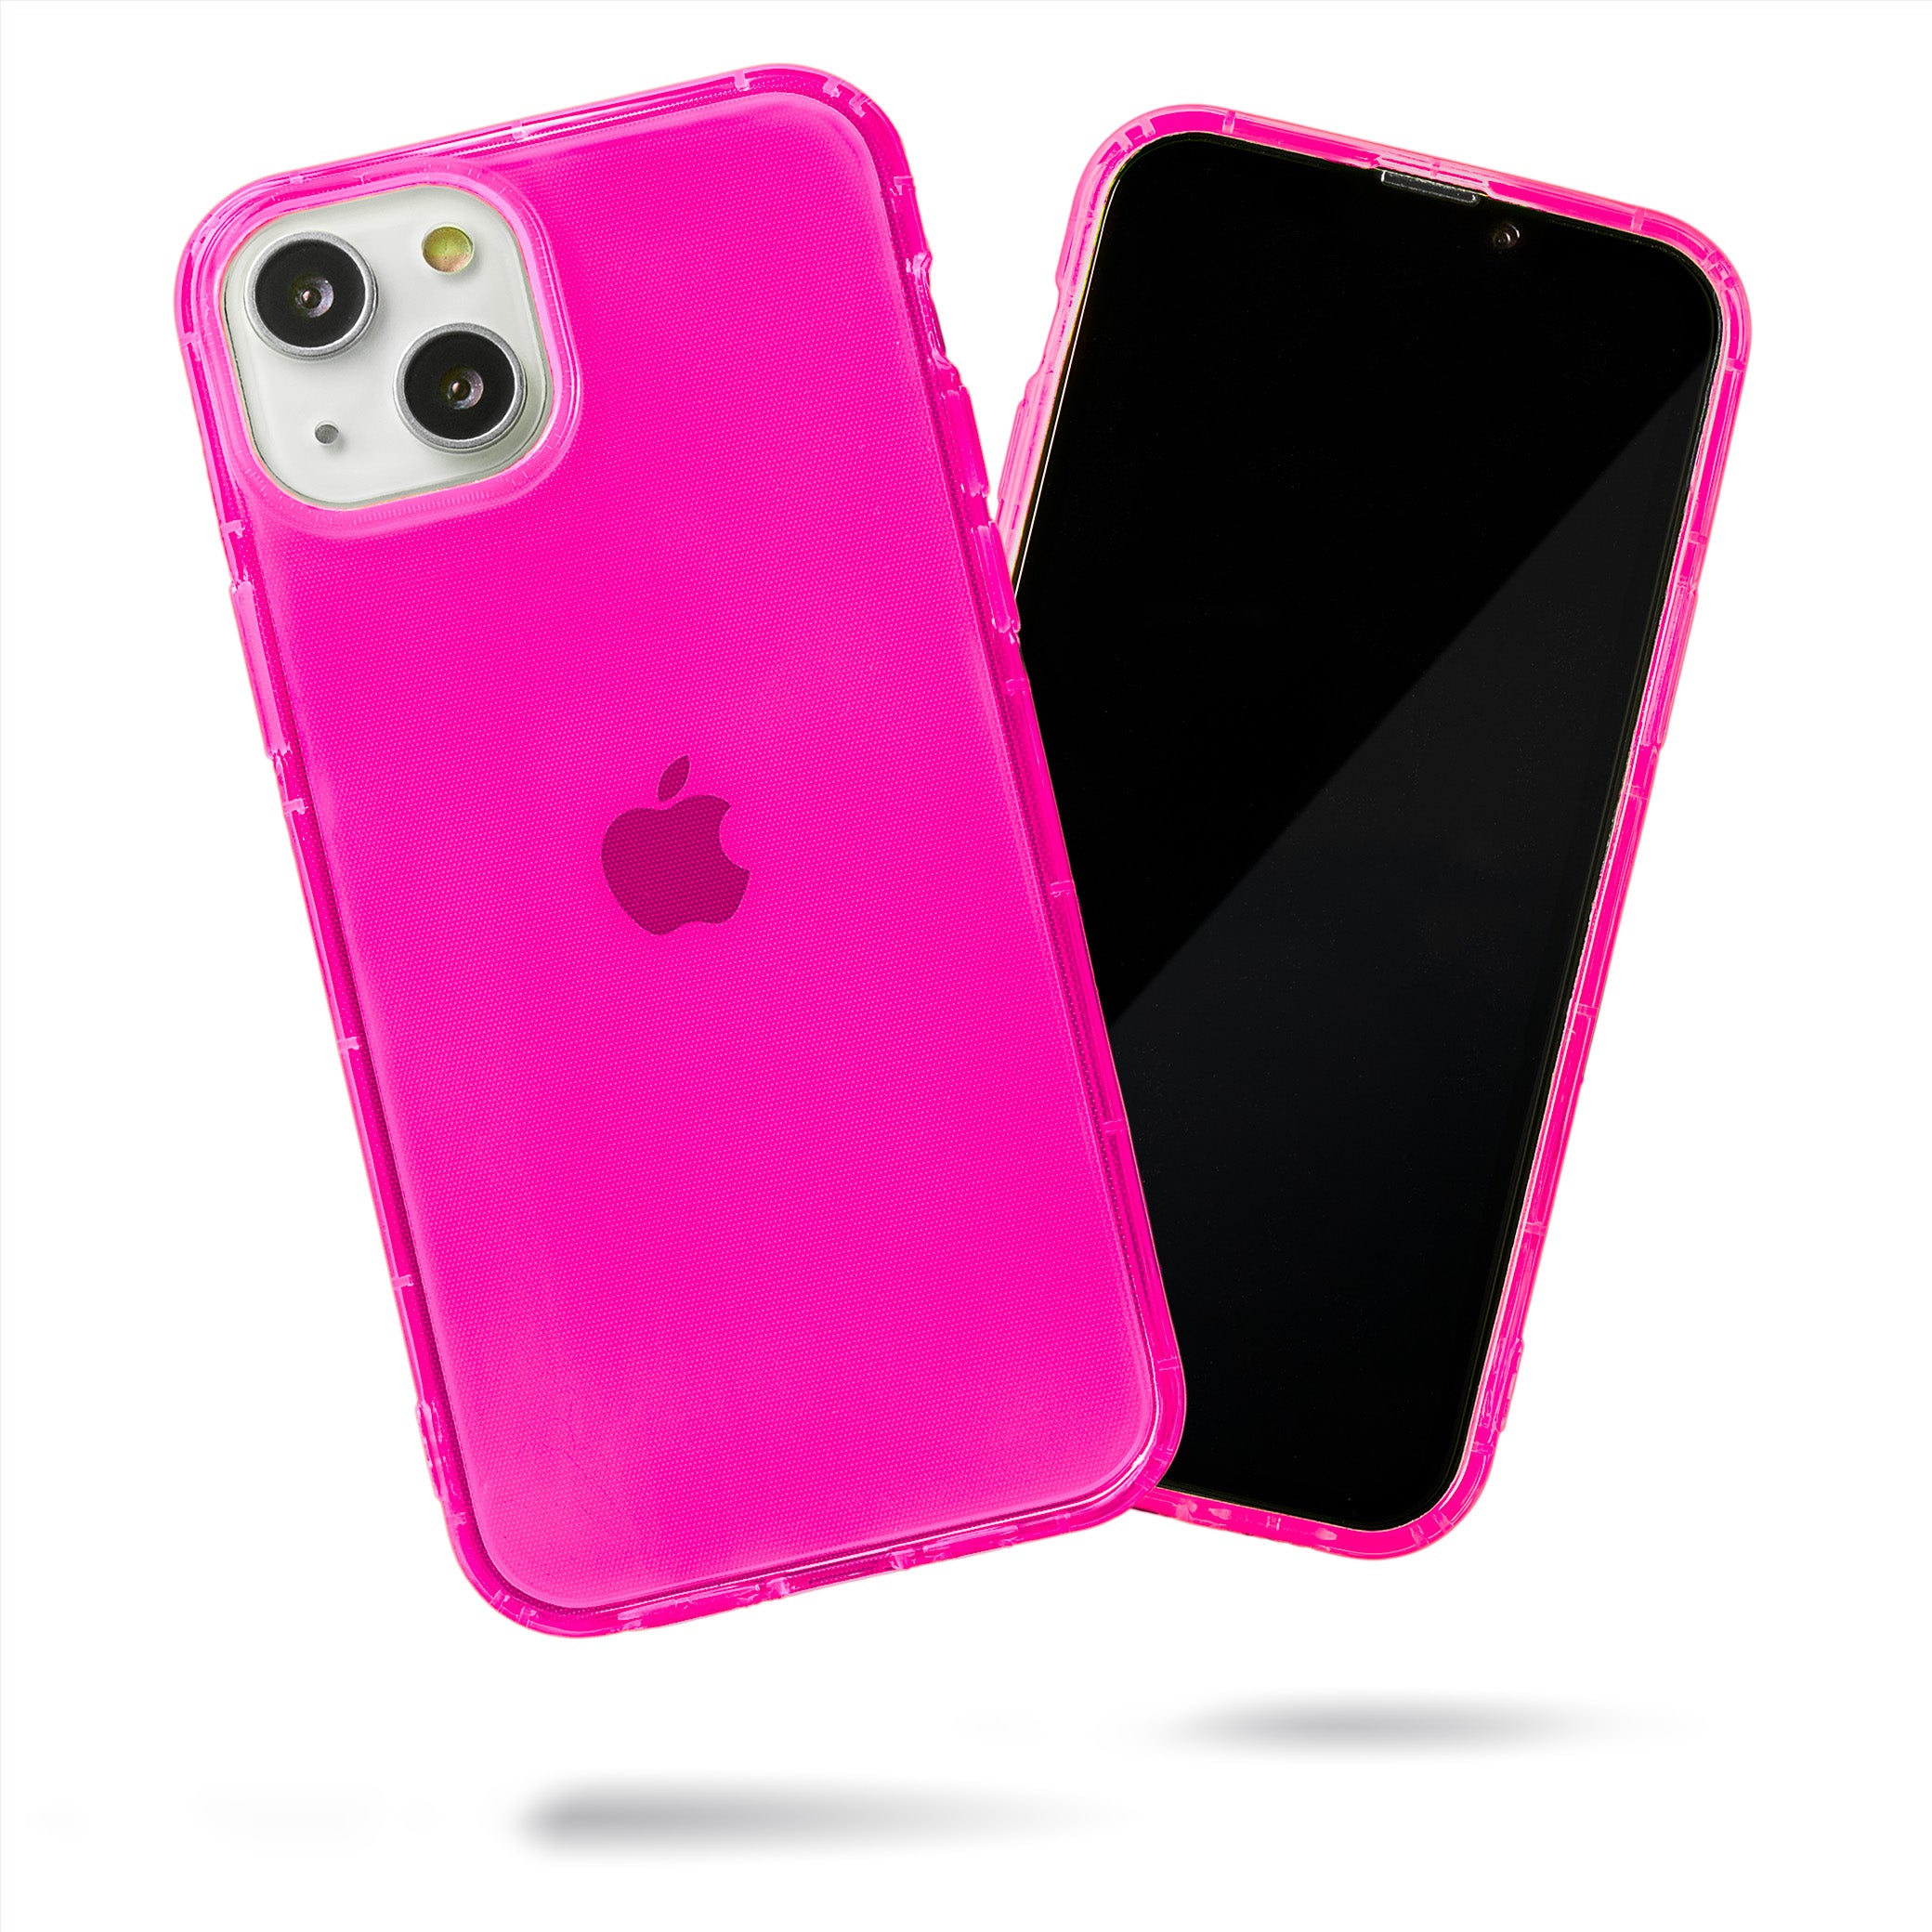 Highlighter Case for iPhone 13 - Eye-Catching Hot Pink